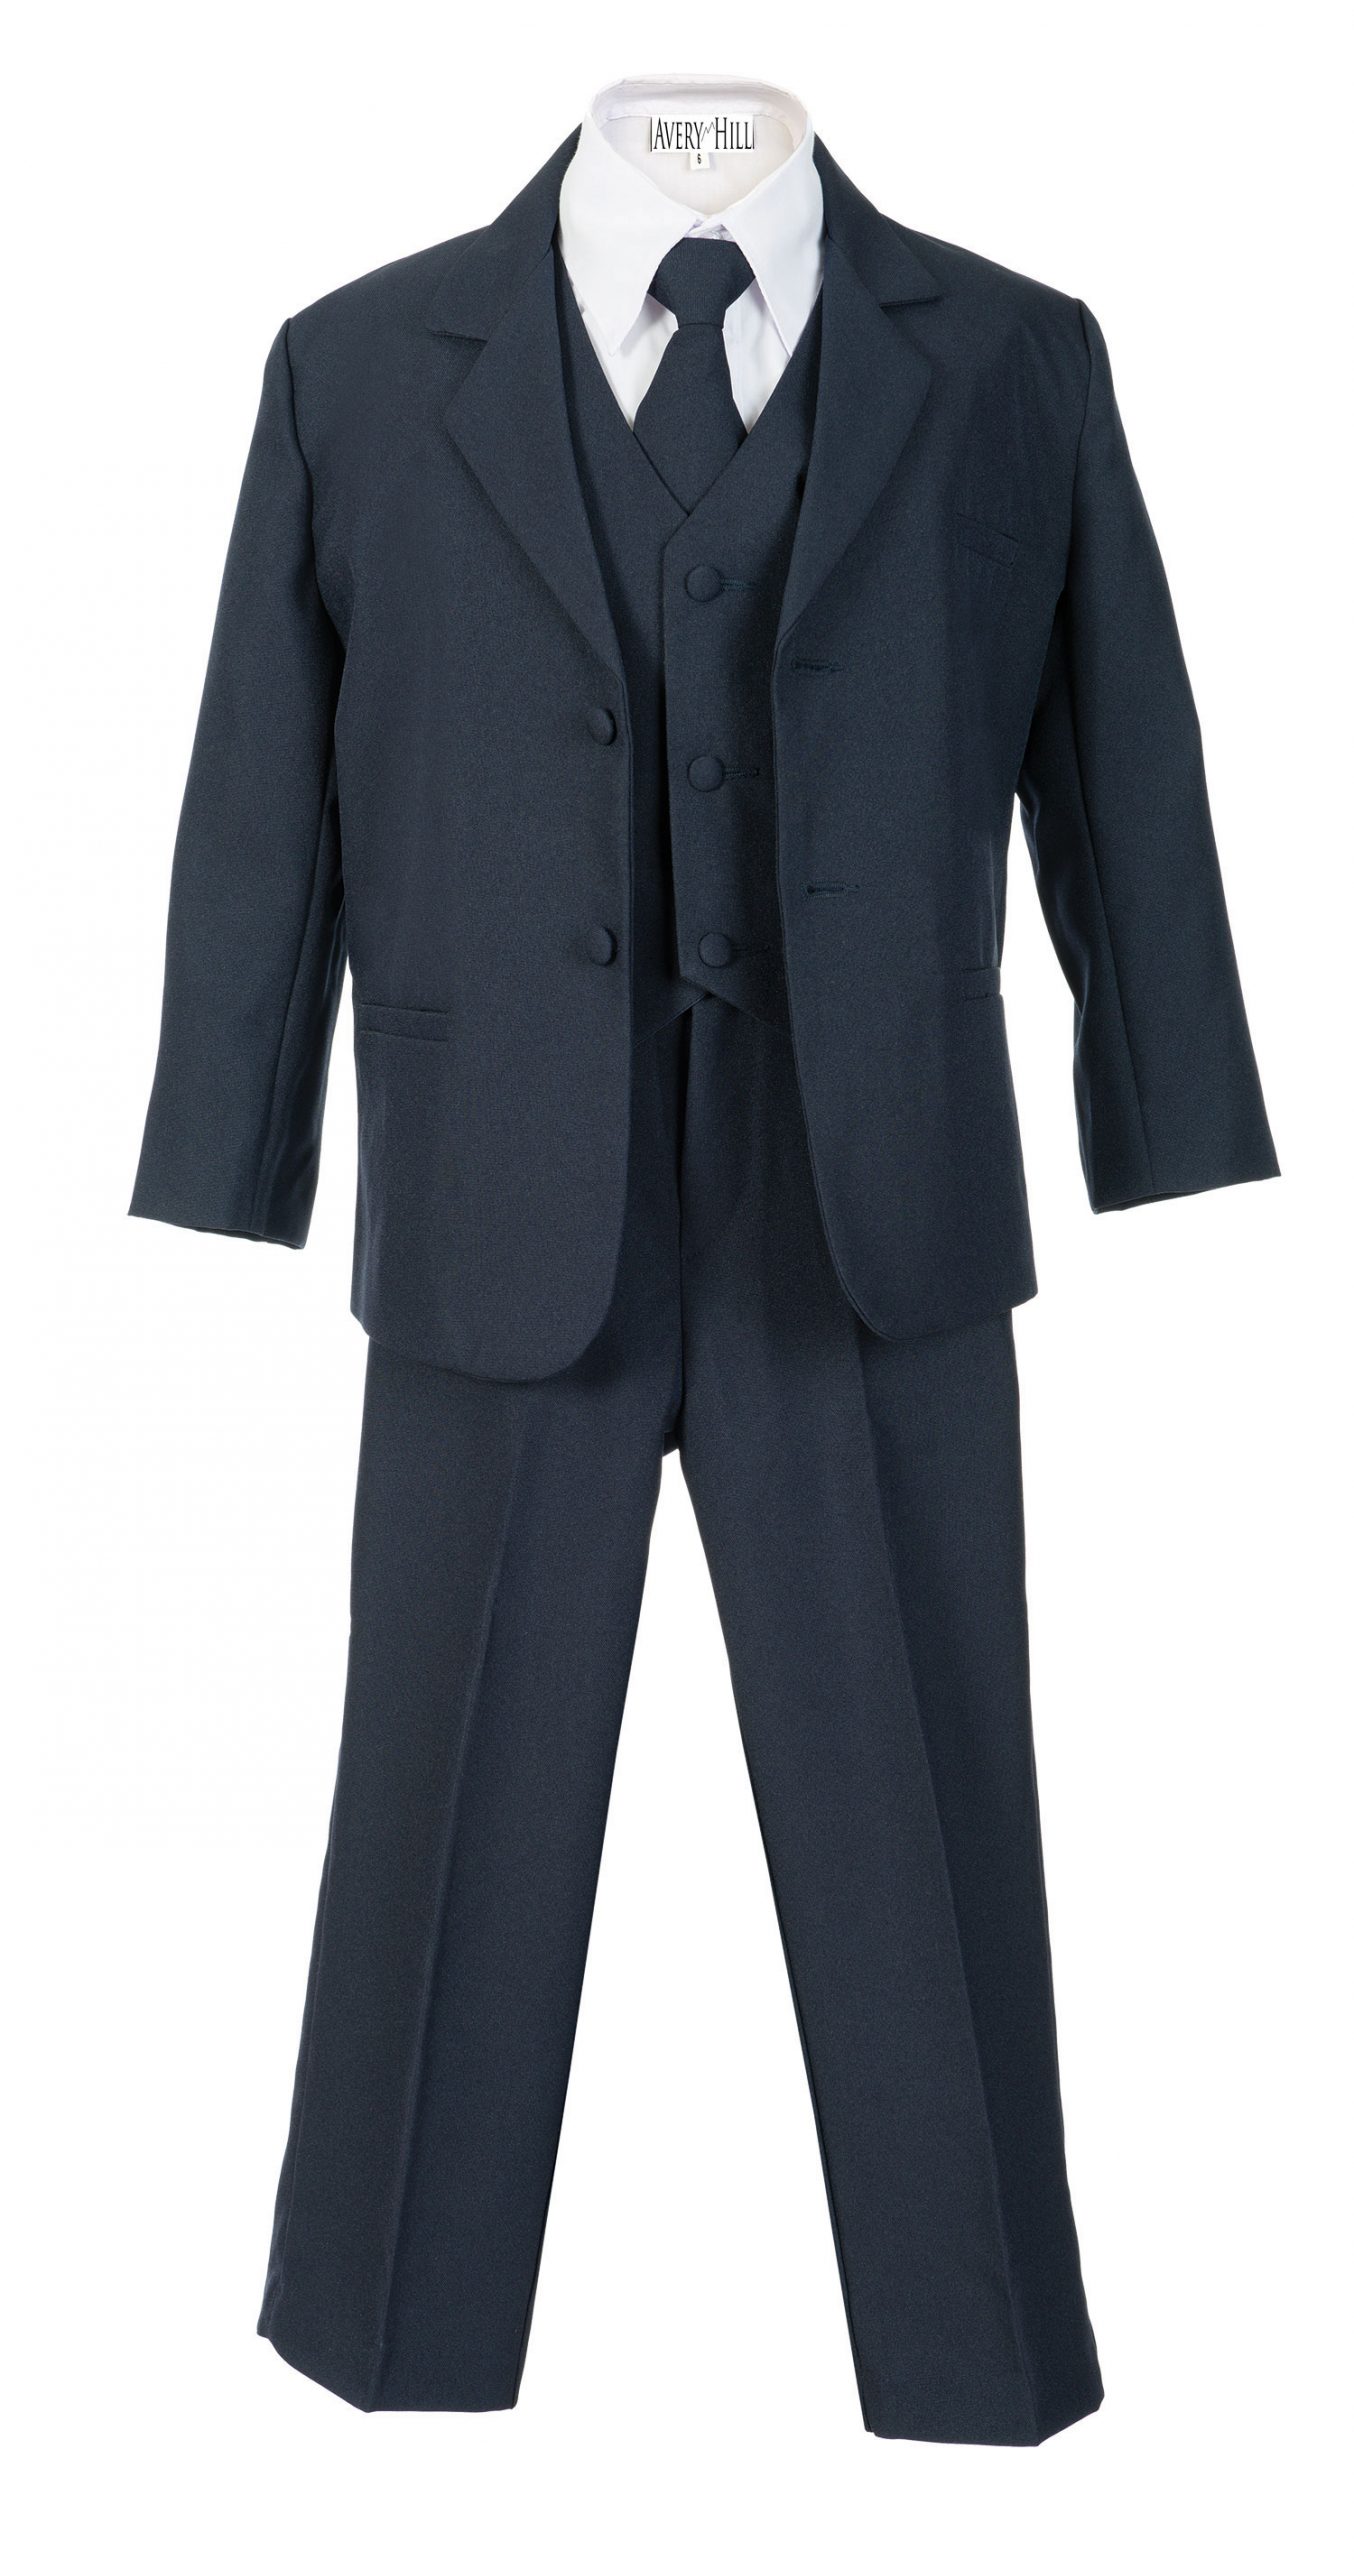 Avery Hill Boys Formal 5 Piece Suit with Shirt and Vest Navy - 5